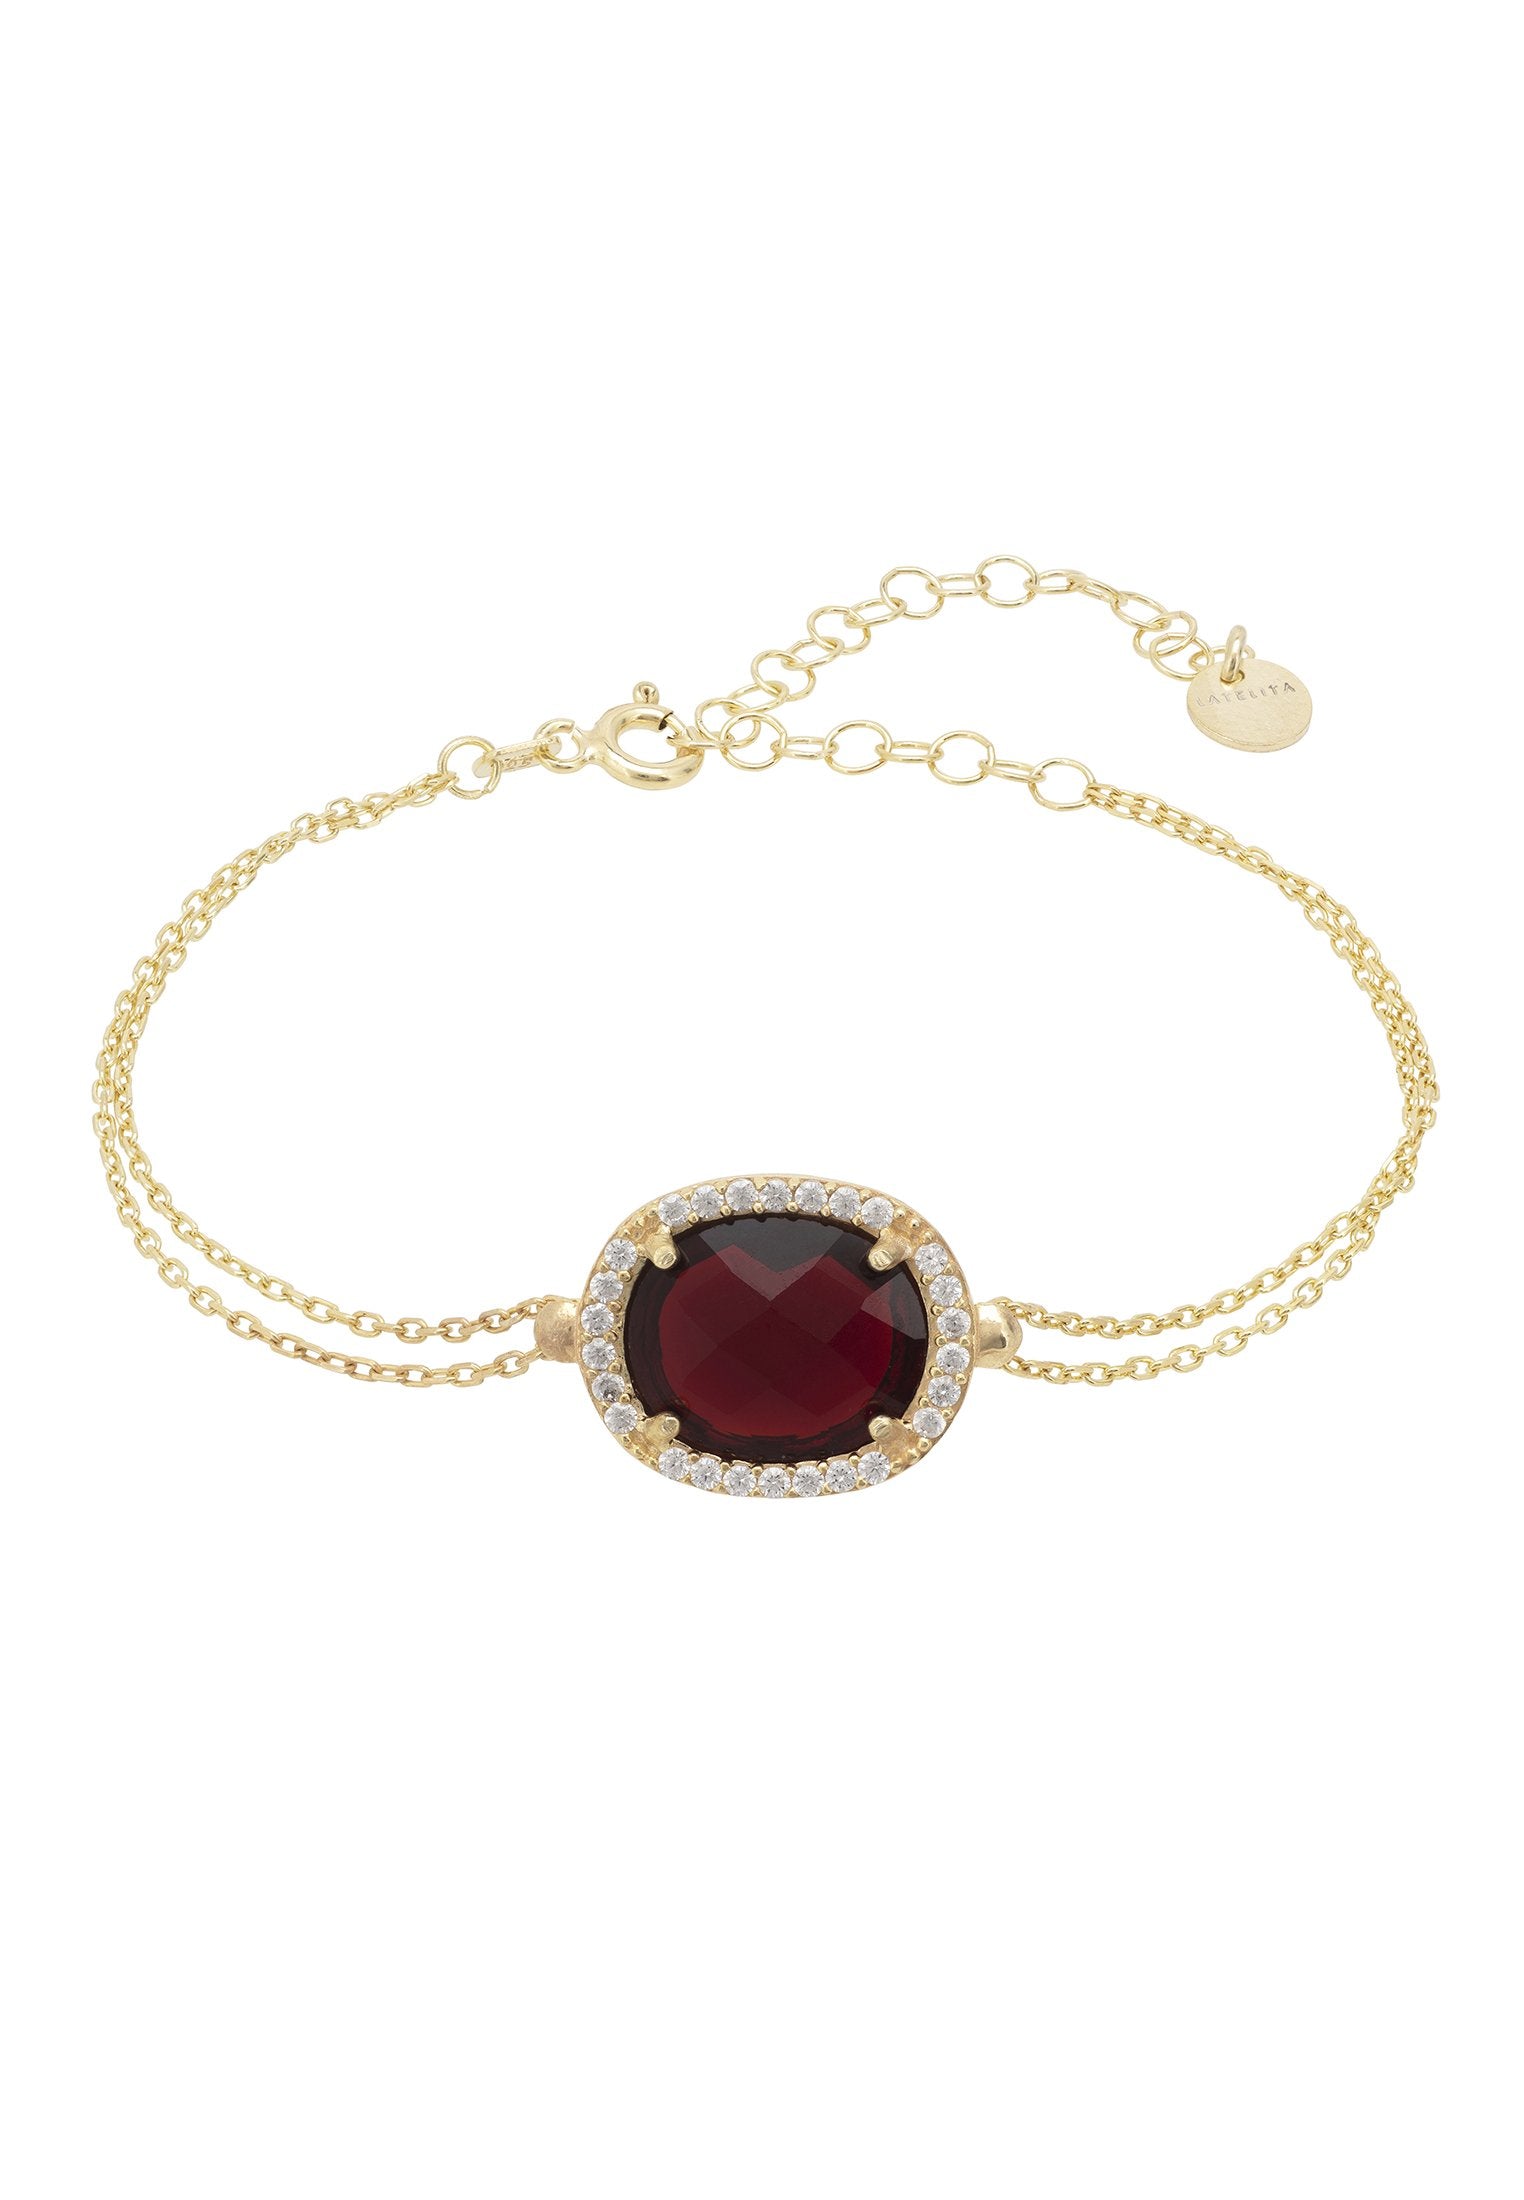 Regal Oval Gemstone Double Chain Bracelet with Garnet and CZ Detailing in Gold - Ideal for Evening Attire - Jewelry & Watches - Bijou Her -  -  - 